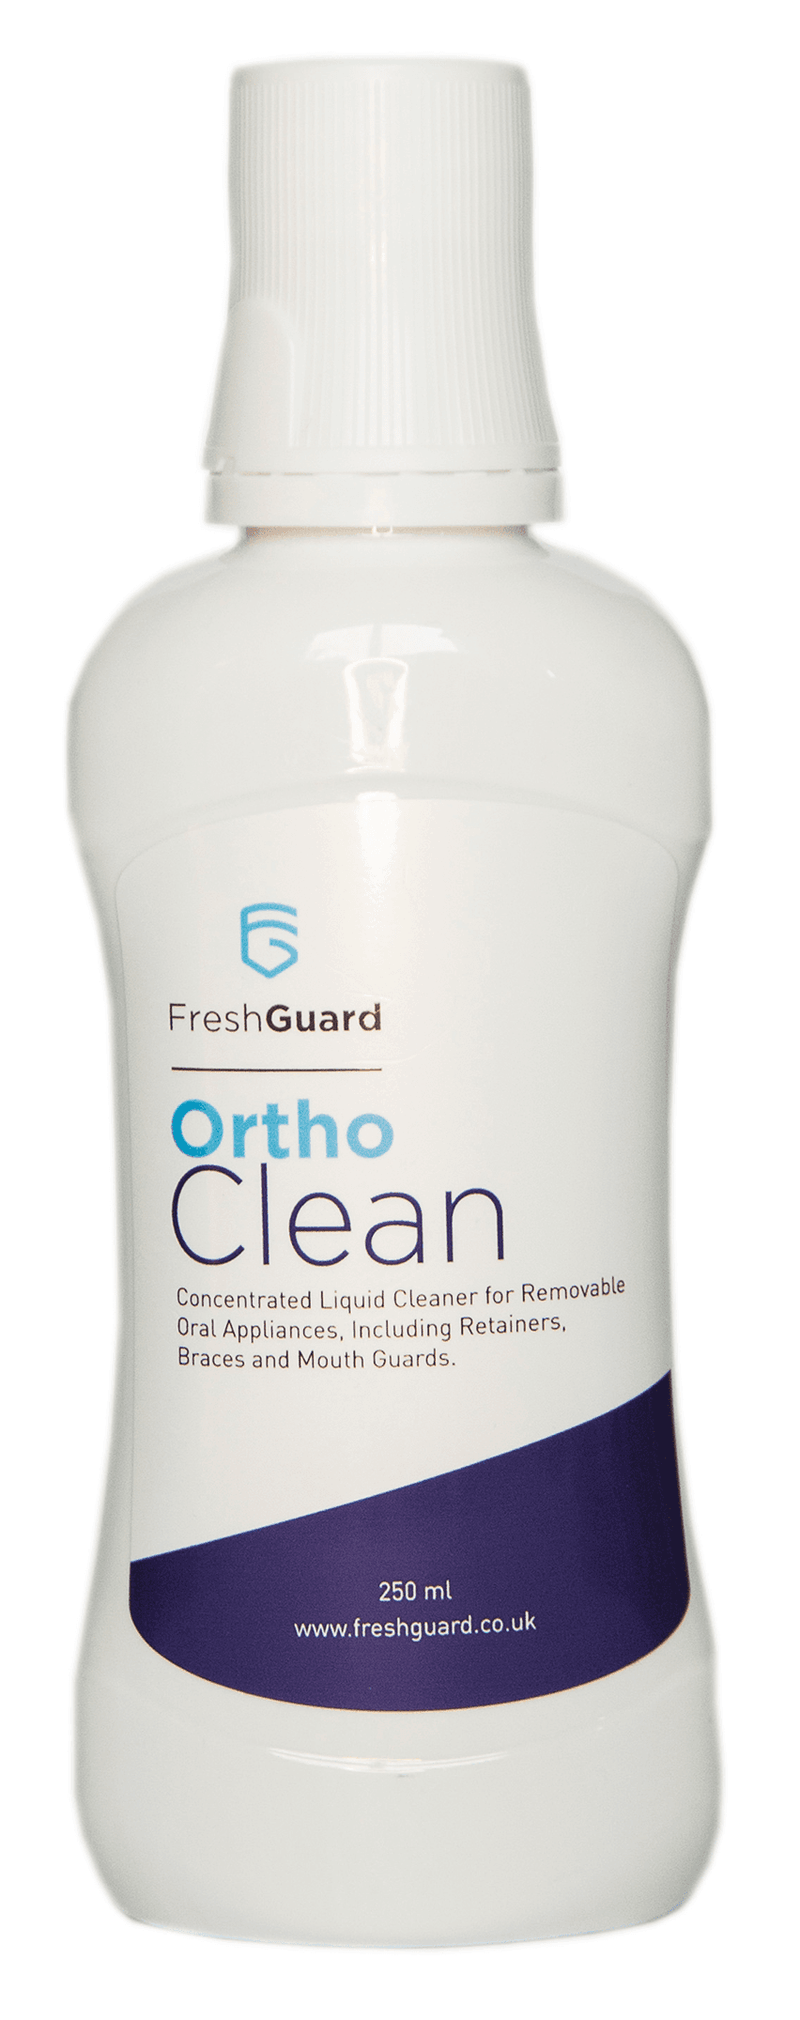 FreshGuard Ortho Clean - Concentrated Liquid Oral Appliance Cleanser - 3 Months Use